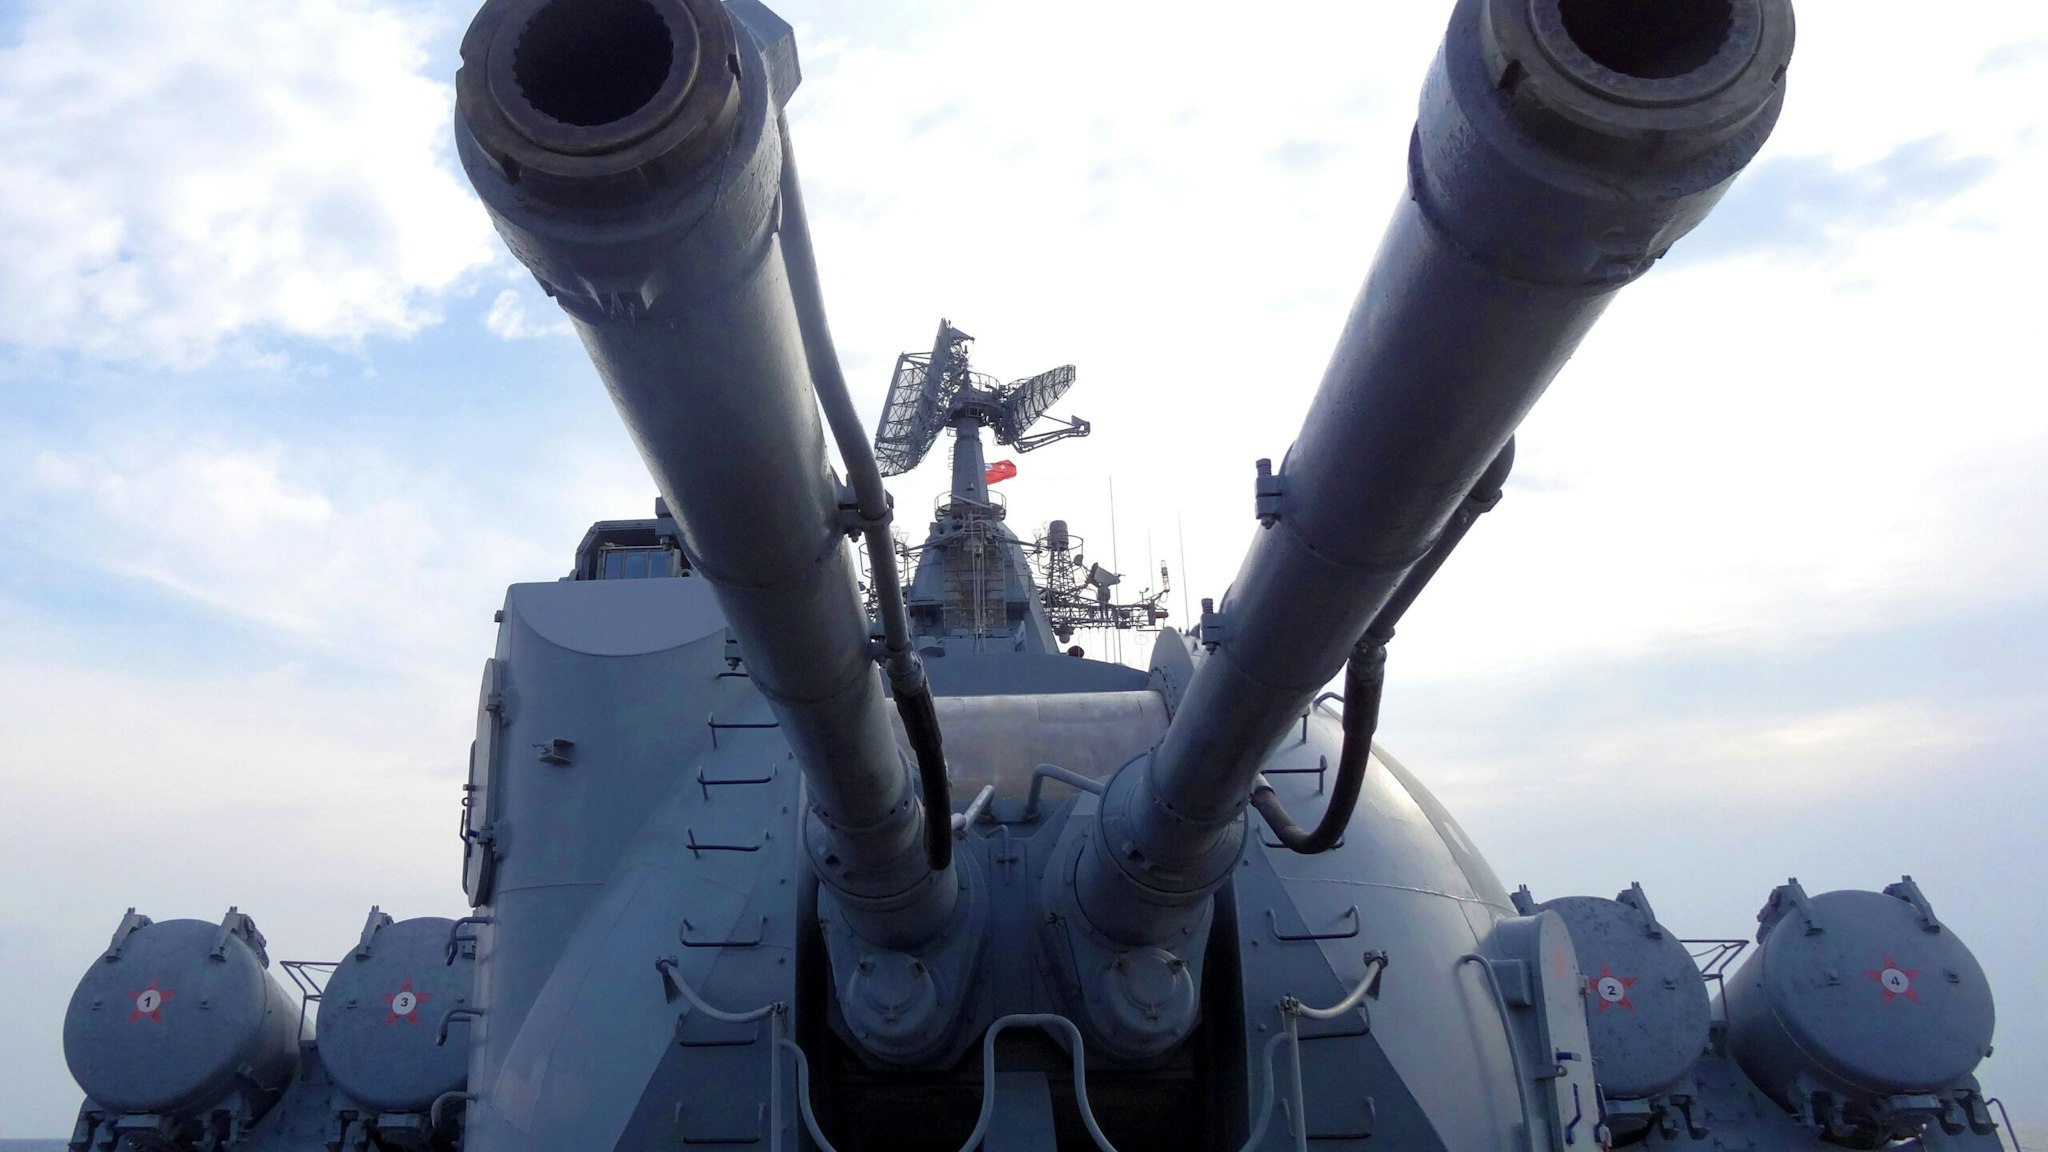 A picture shows an artillery system on the Russian missile cruiser Moskva in the Mediterranean Sea, off the coast of Syria, on December 17, 2015. Russia began its air war in Syria on September 30, conducting air strikes against a range of anti-regime armed groups including US-backed rebels and jihadist groups. Moscow has said it is fighting and other "terrorist groups," but its campaign has come under fire by Western officials who accuse the Kremlin of seeking to prop up Syrian President Bashar al-Assad.